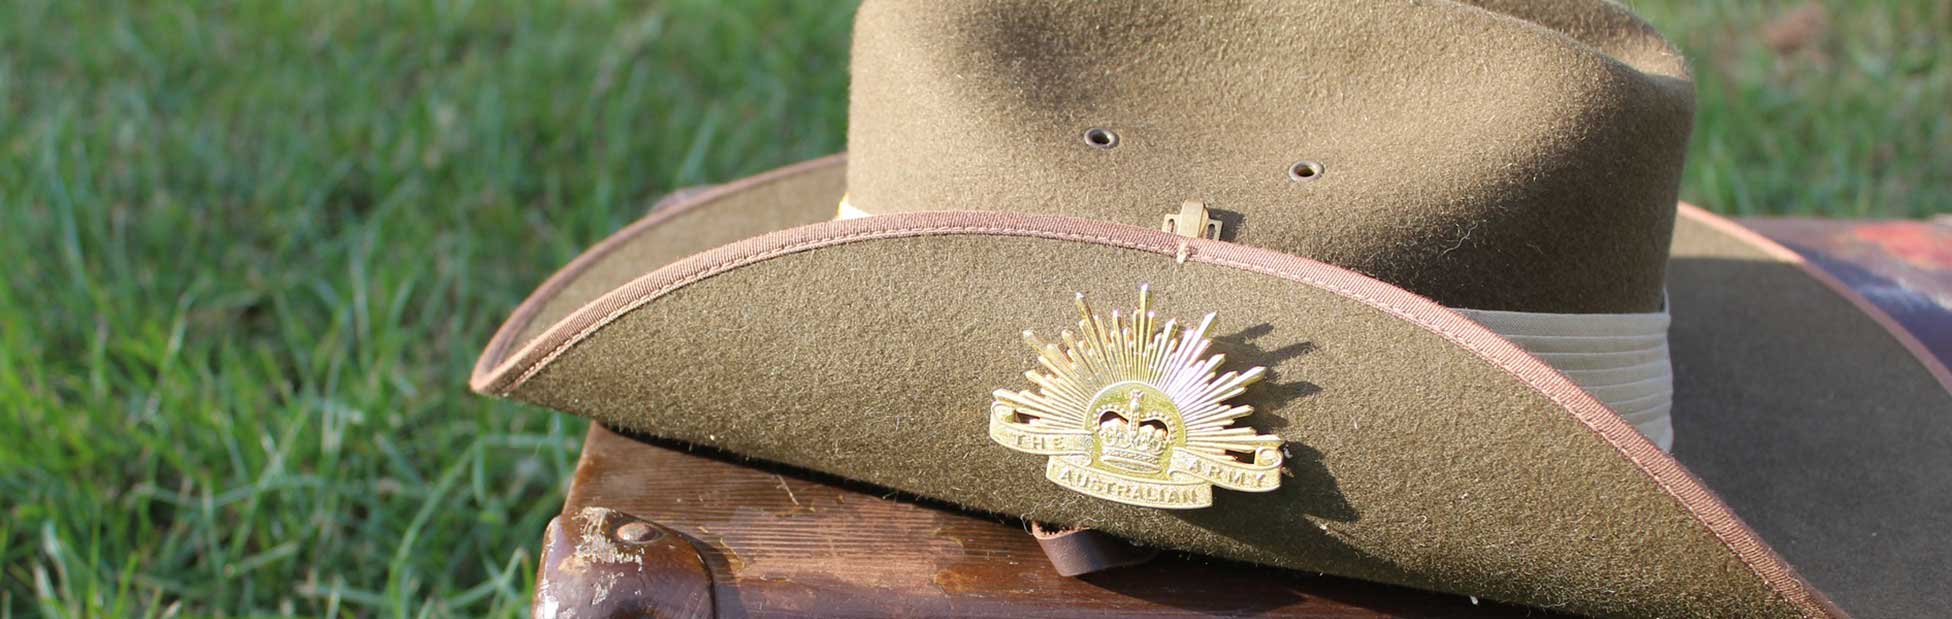 Army hat on suitcase